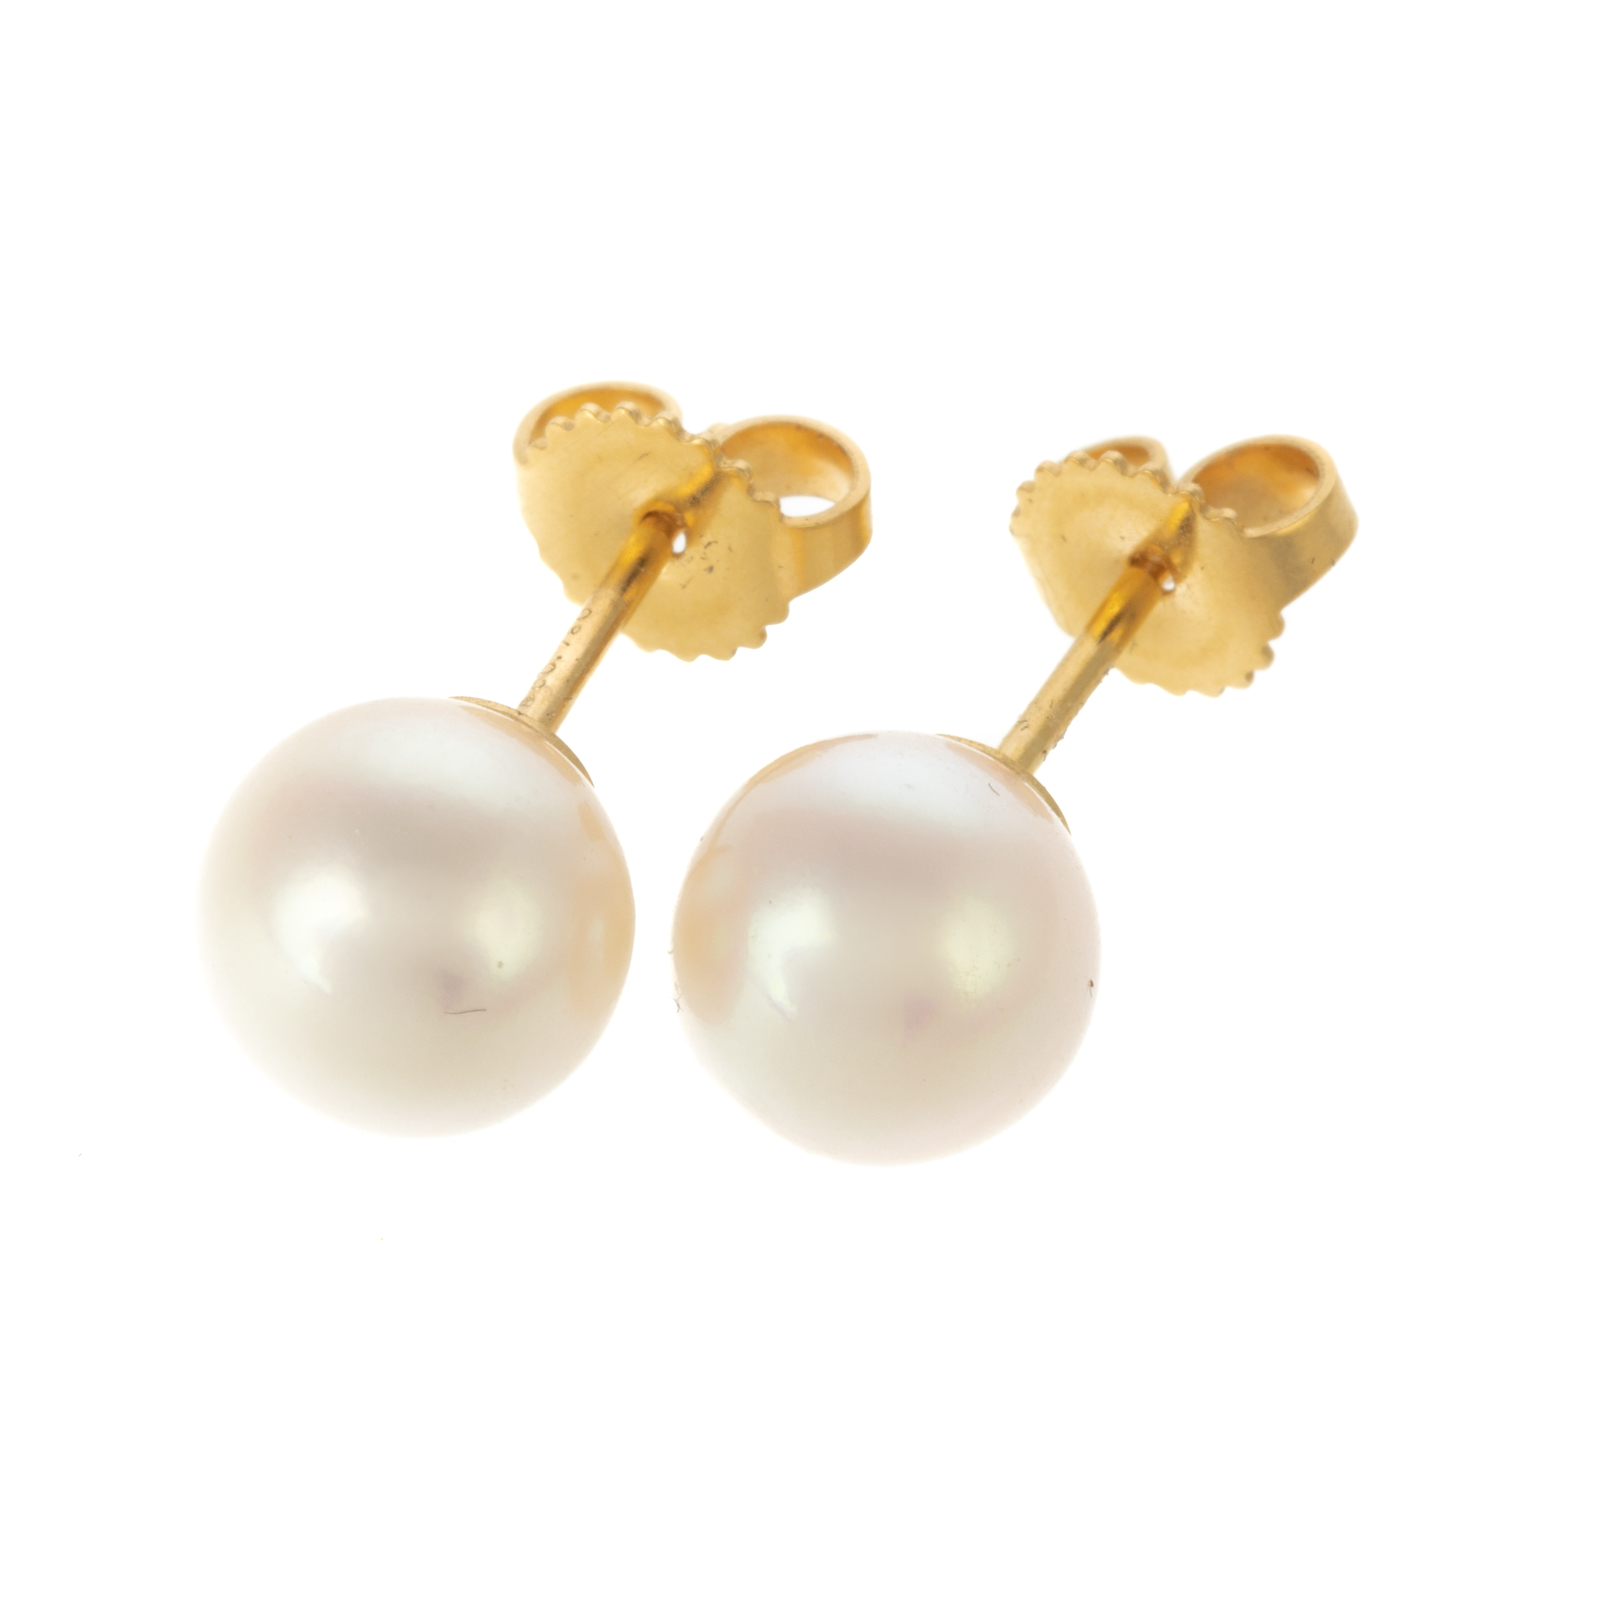 A PAIR OF TIFFANY & CO. 8MM PEARL